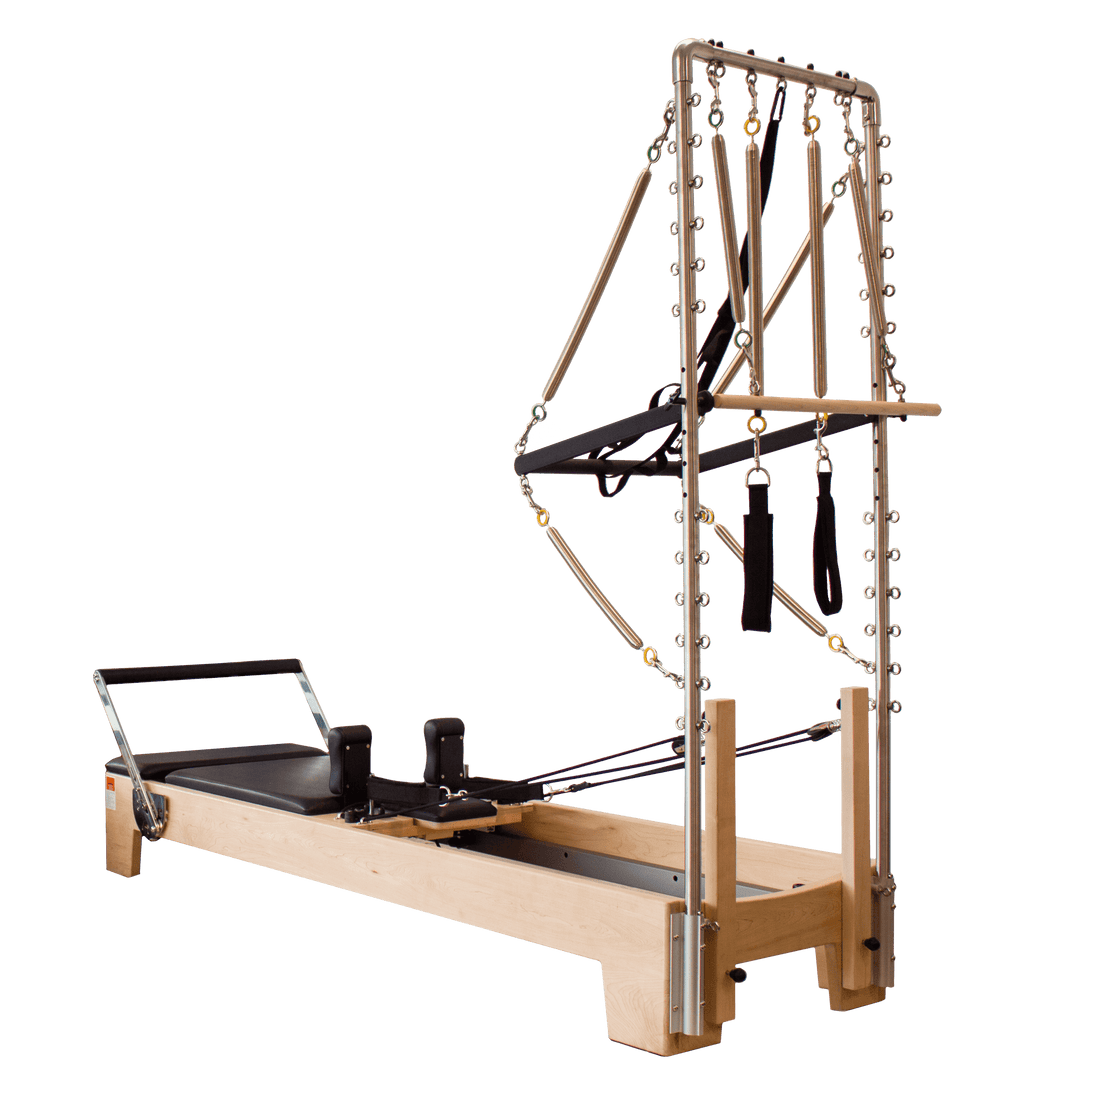 Buy Trapeze Pilates Reformers Online - Motion Pilates Full Trapeze Package